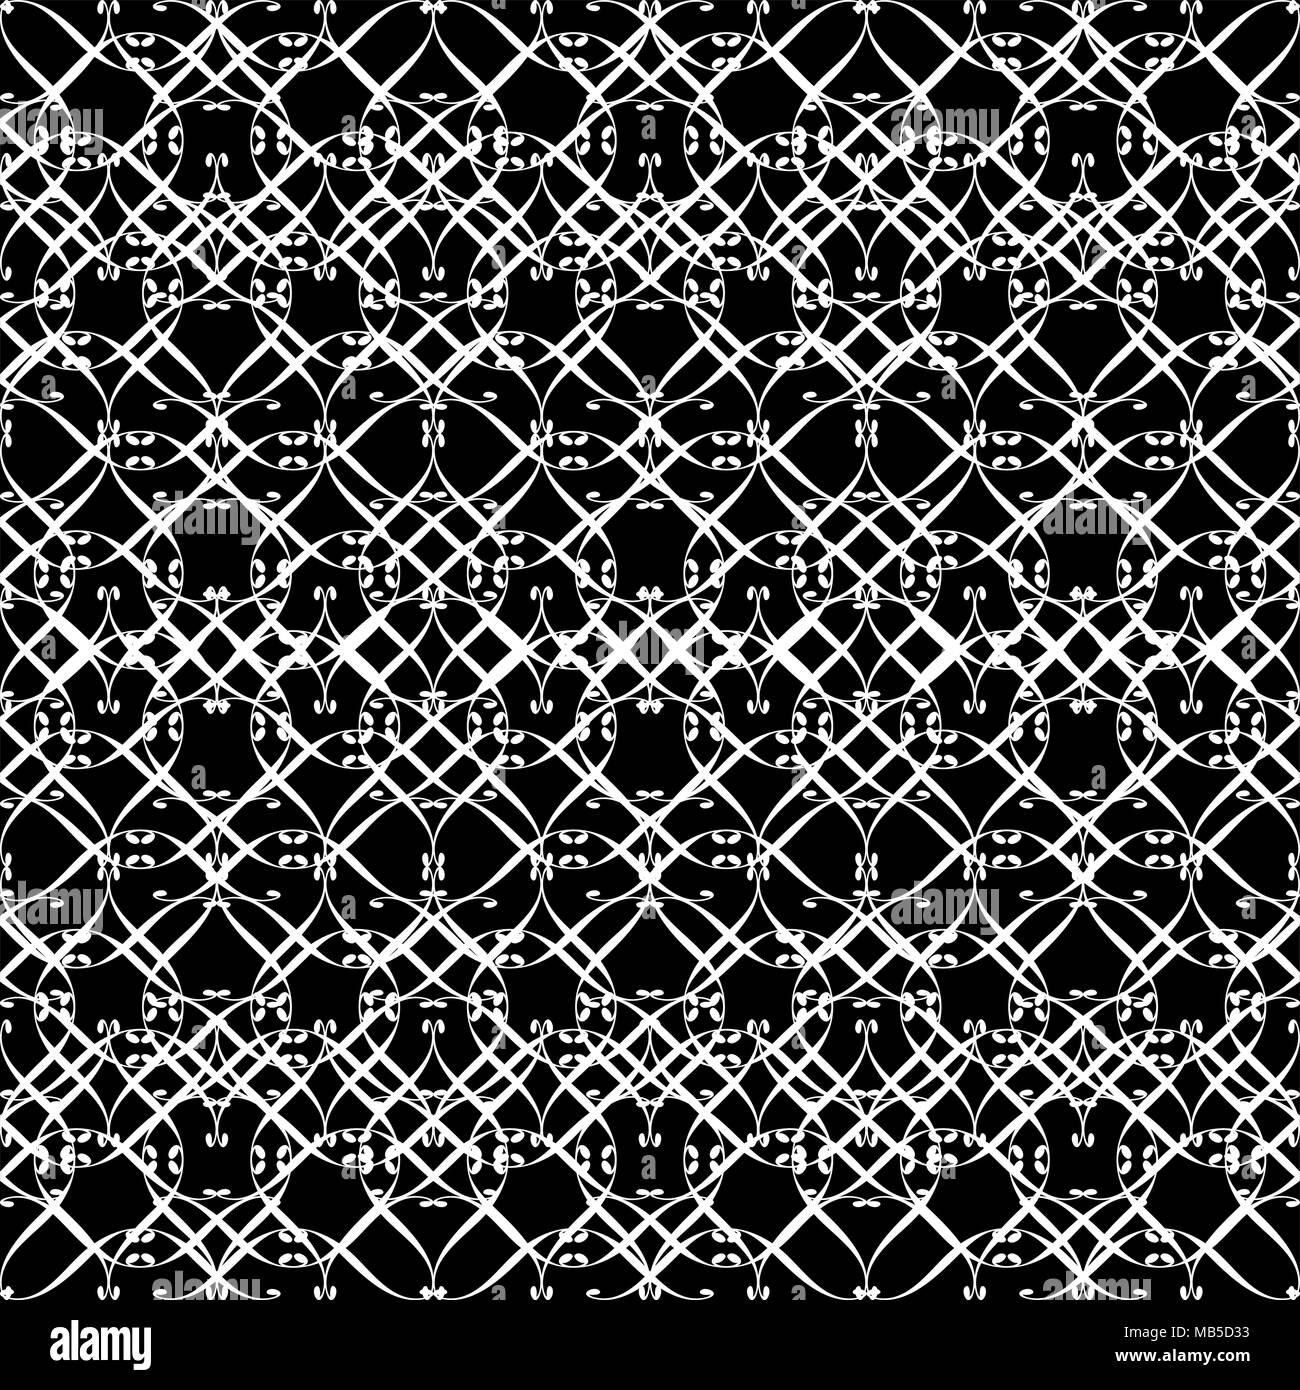 Lacy pattern in black and white Stock Vector